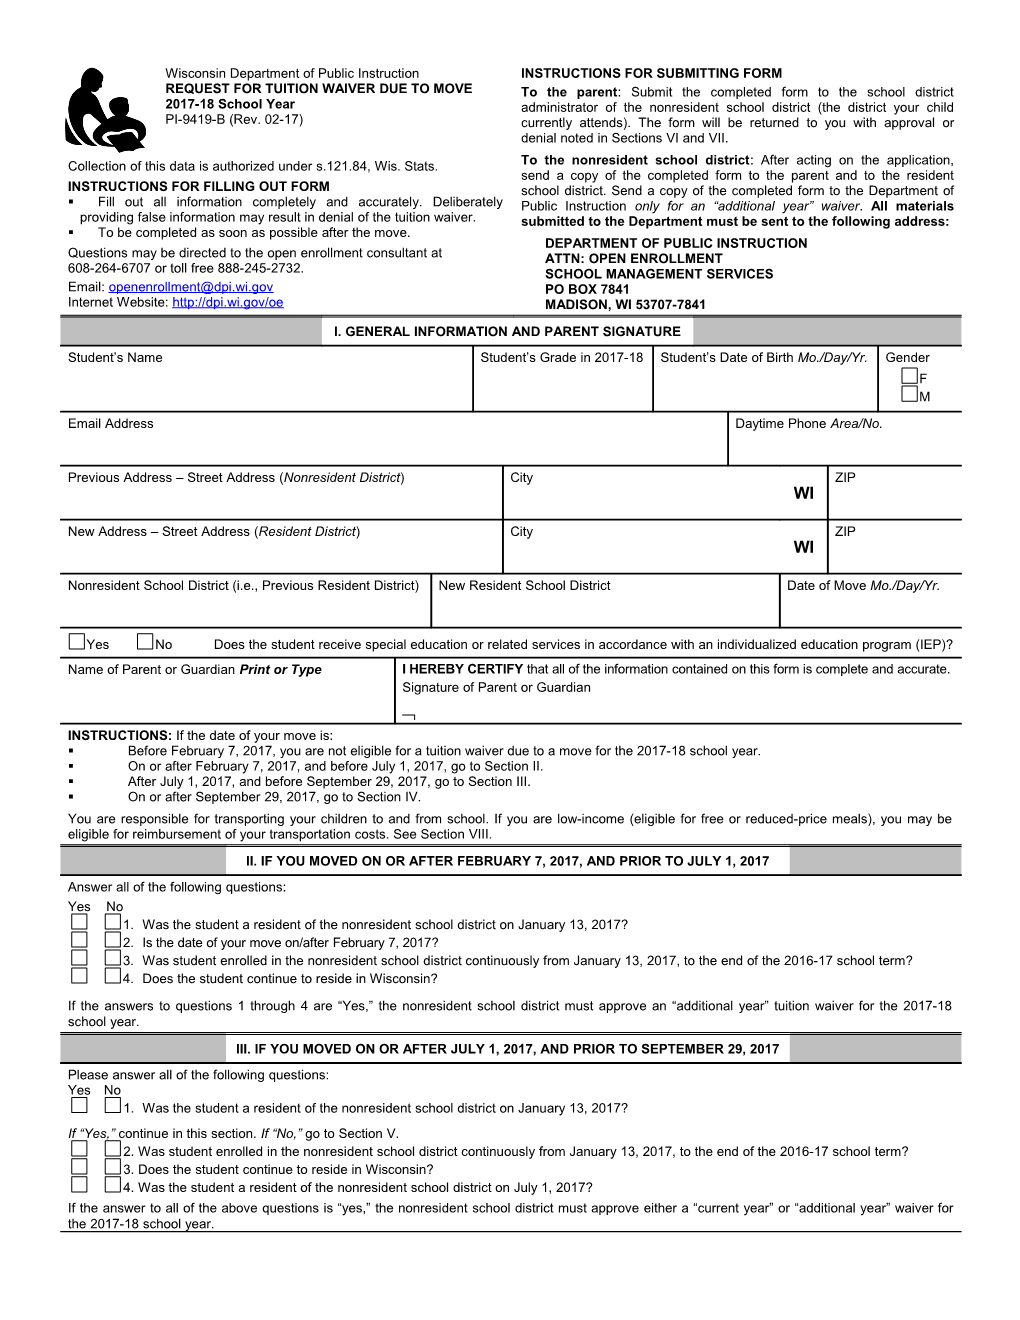 PI-9419-B Request for Tuition Waiver Due to Move